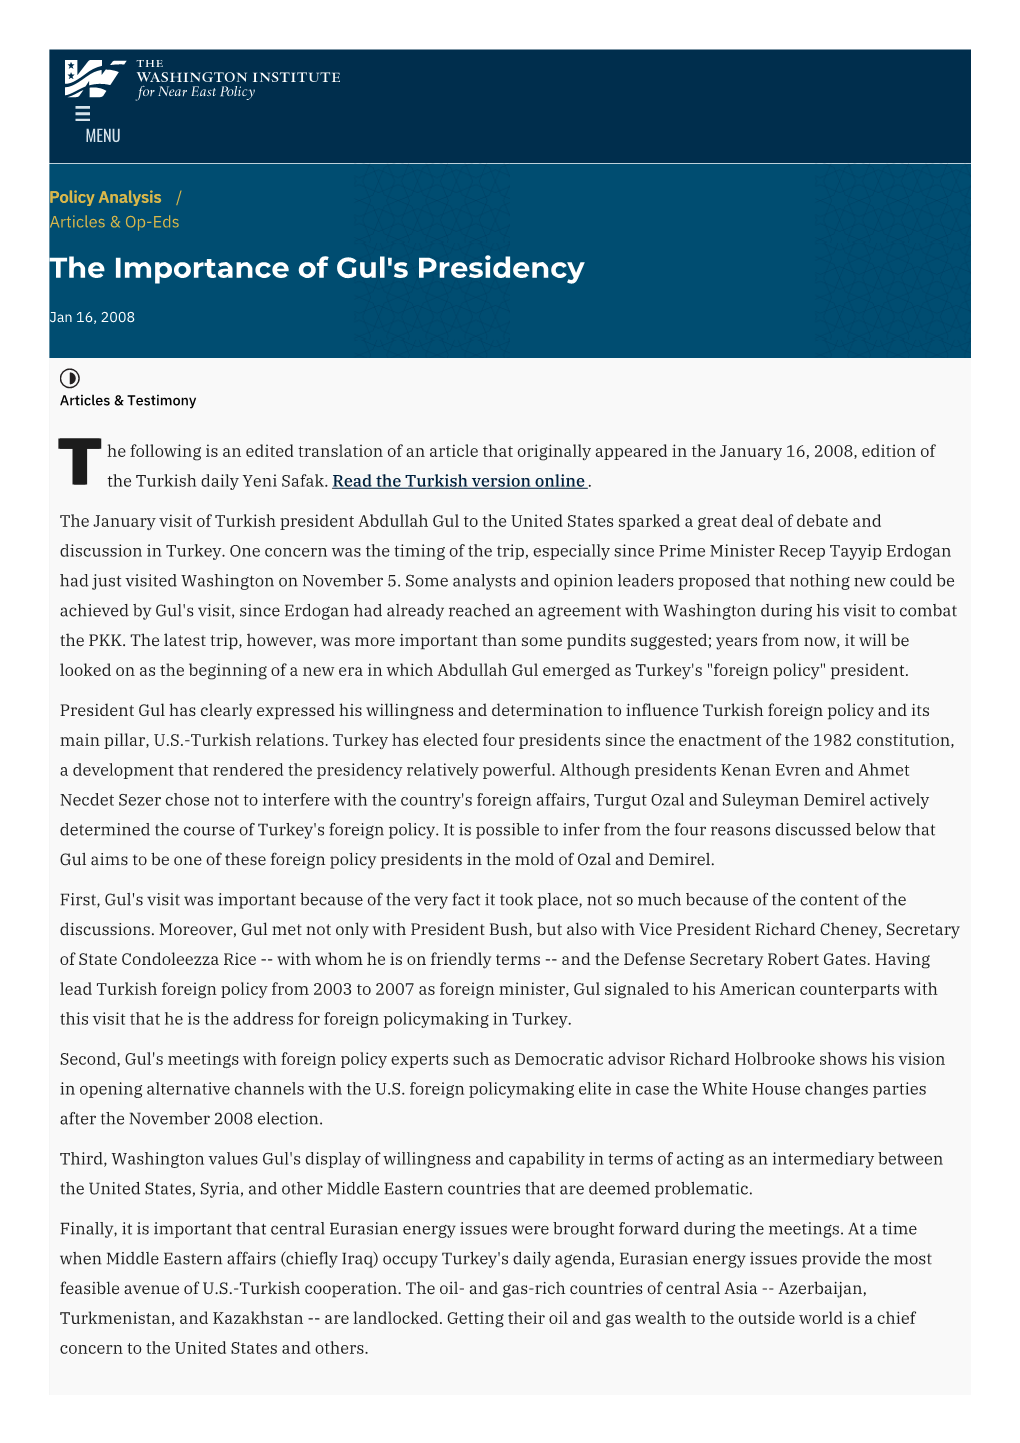 The Importance of Gul's Presidency | the Washington Institute